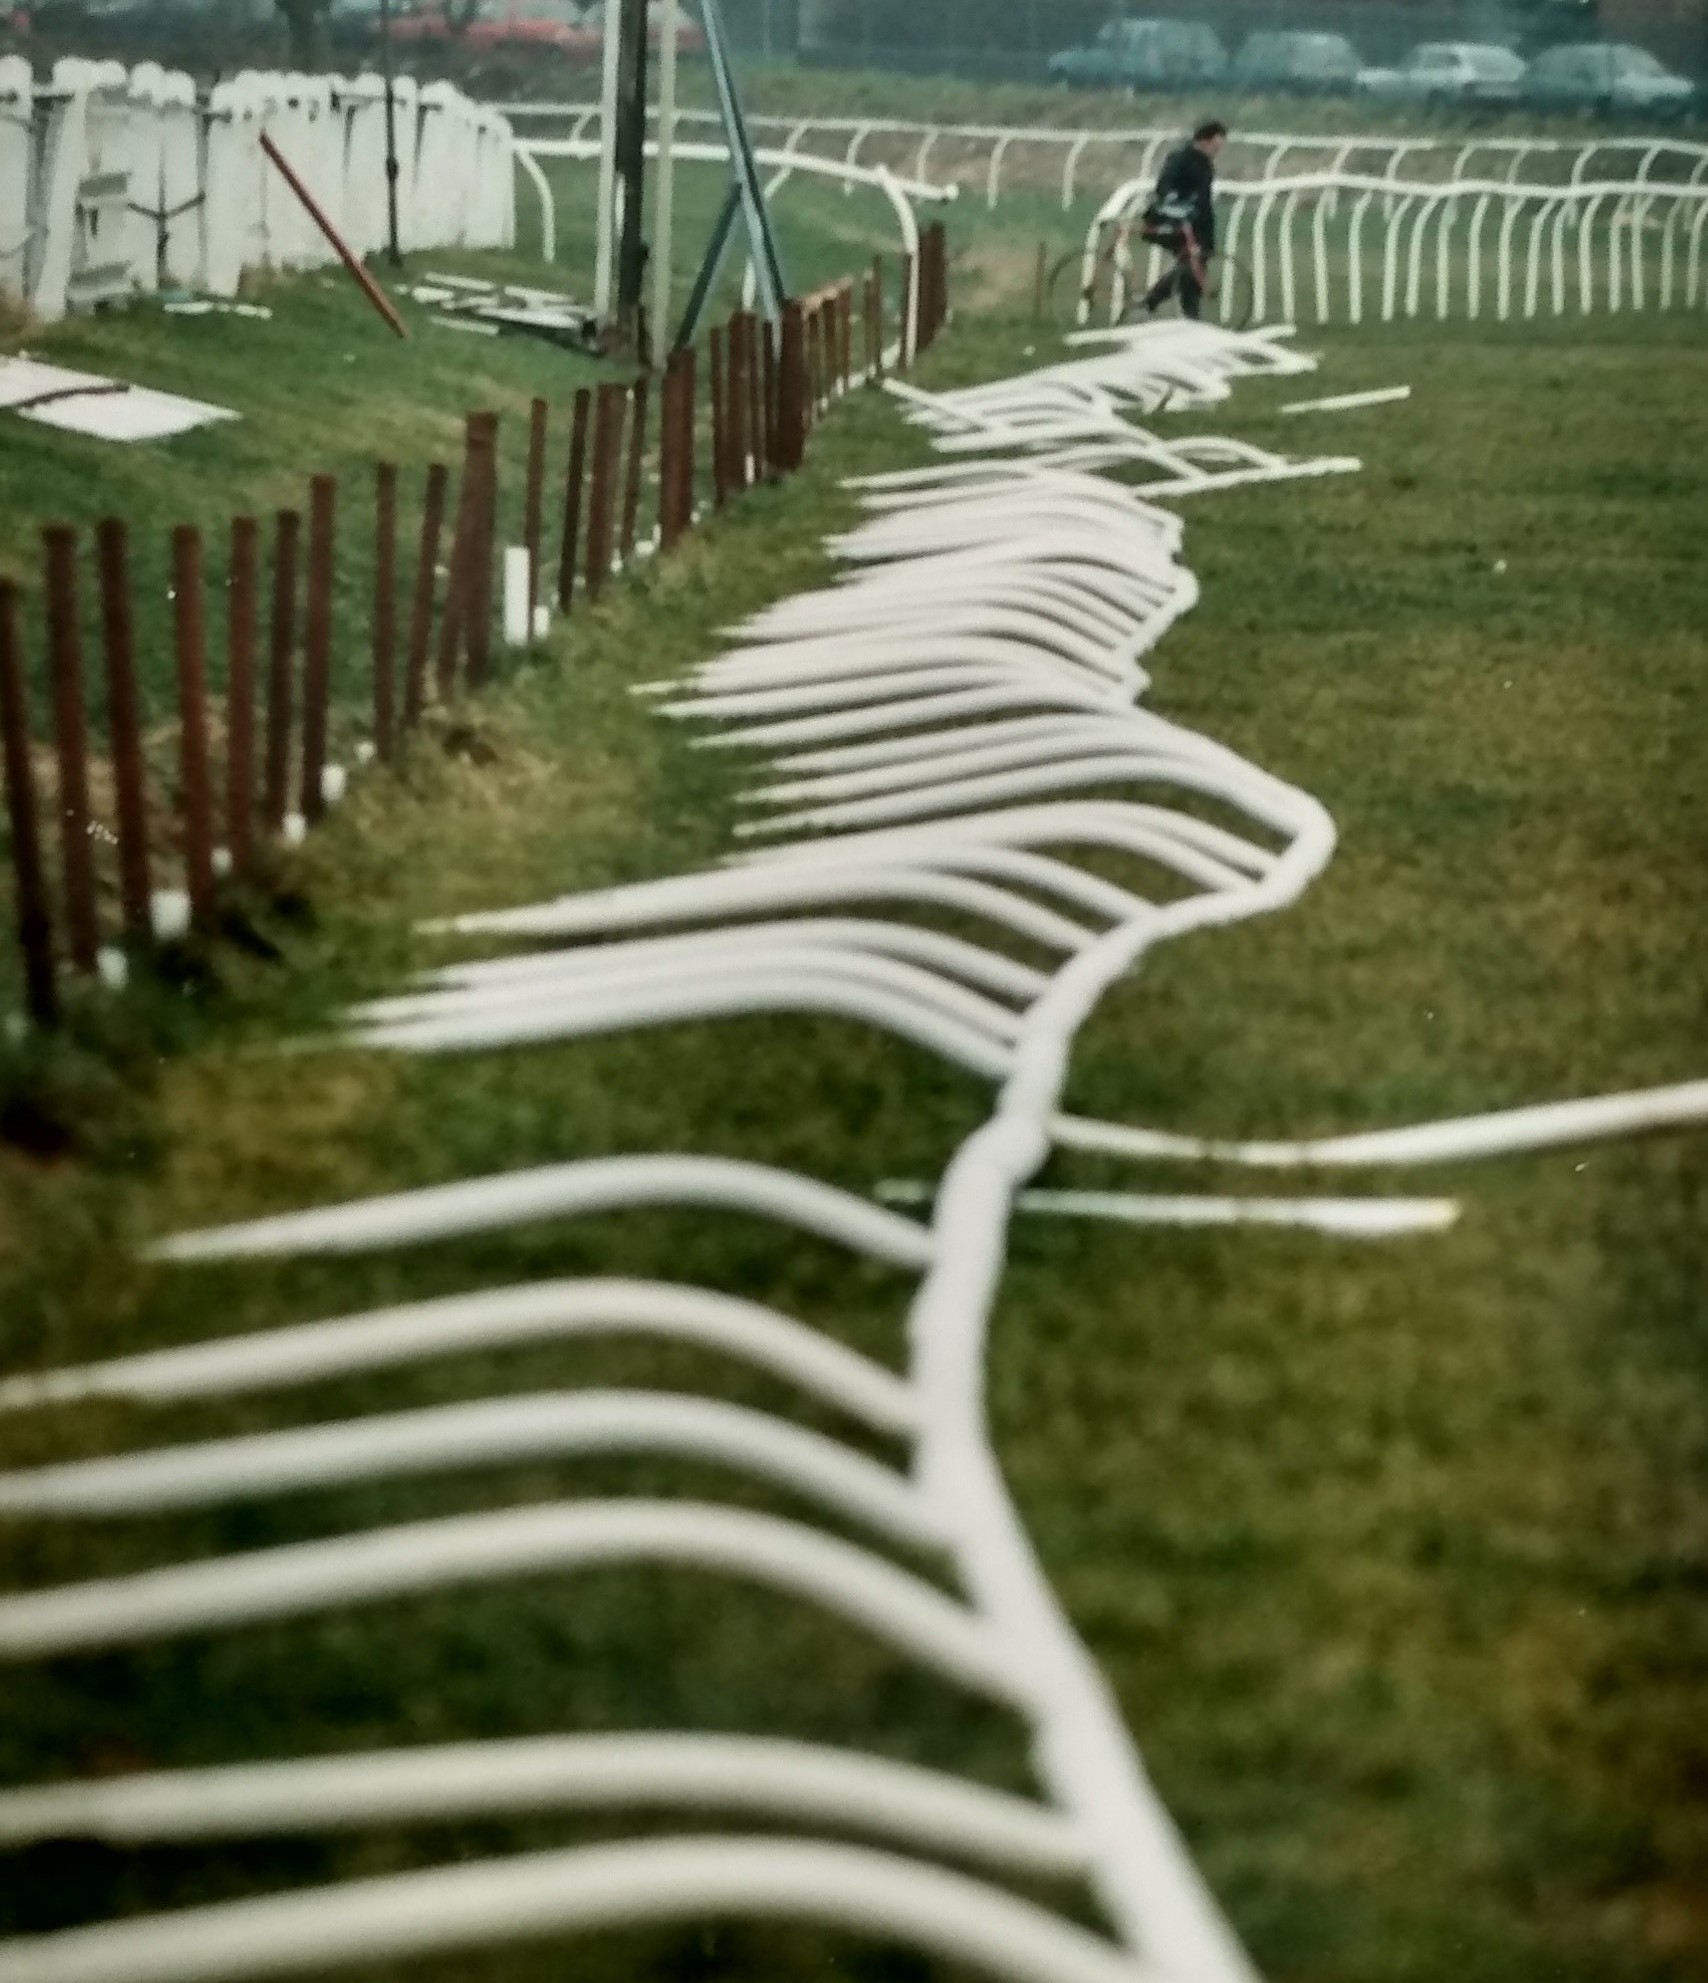 Plastic rails laid out ready for erection in March 1996. Vandalism fears had delayed the course putting them up